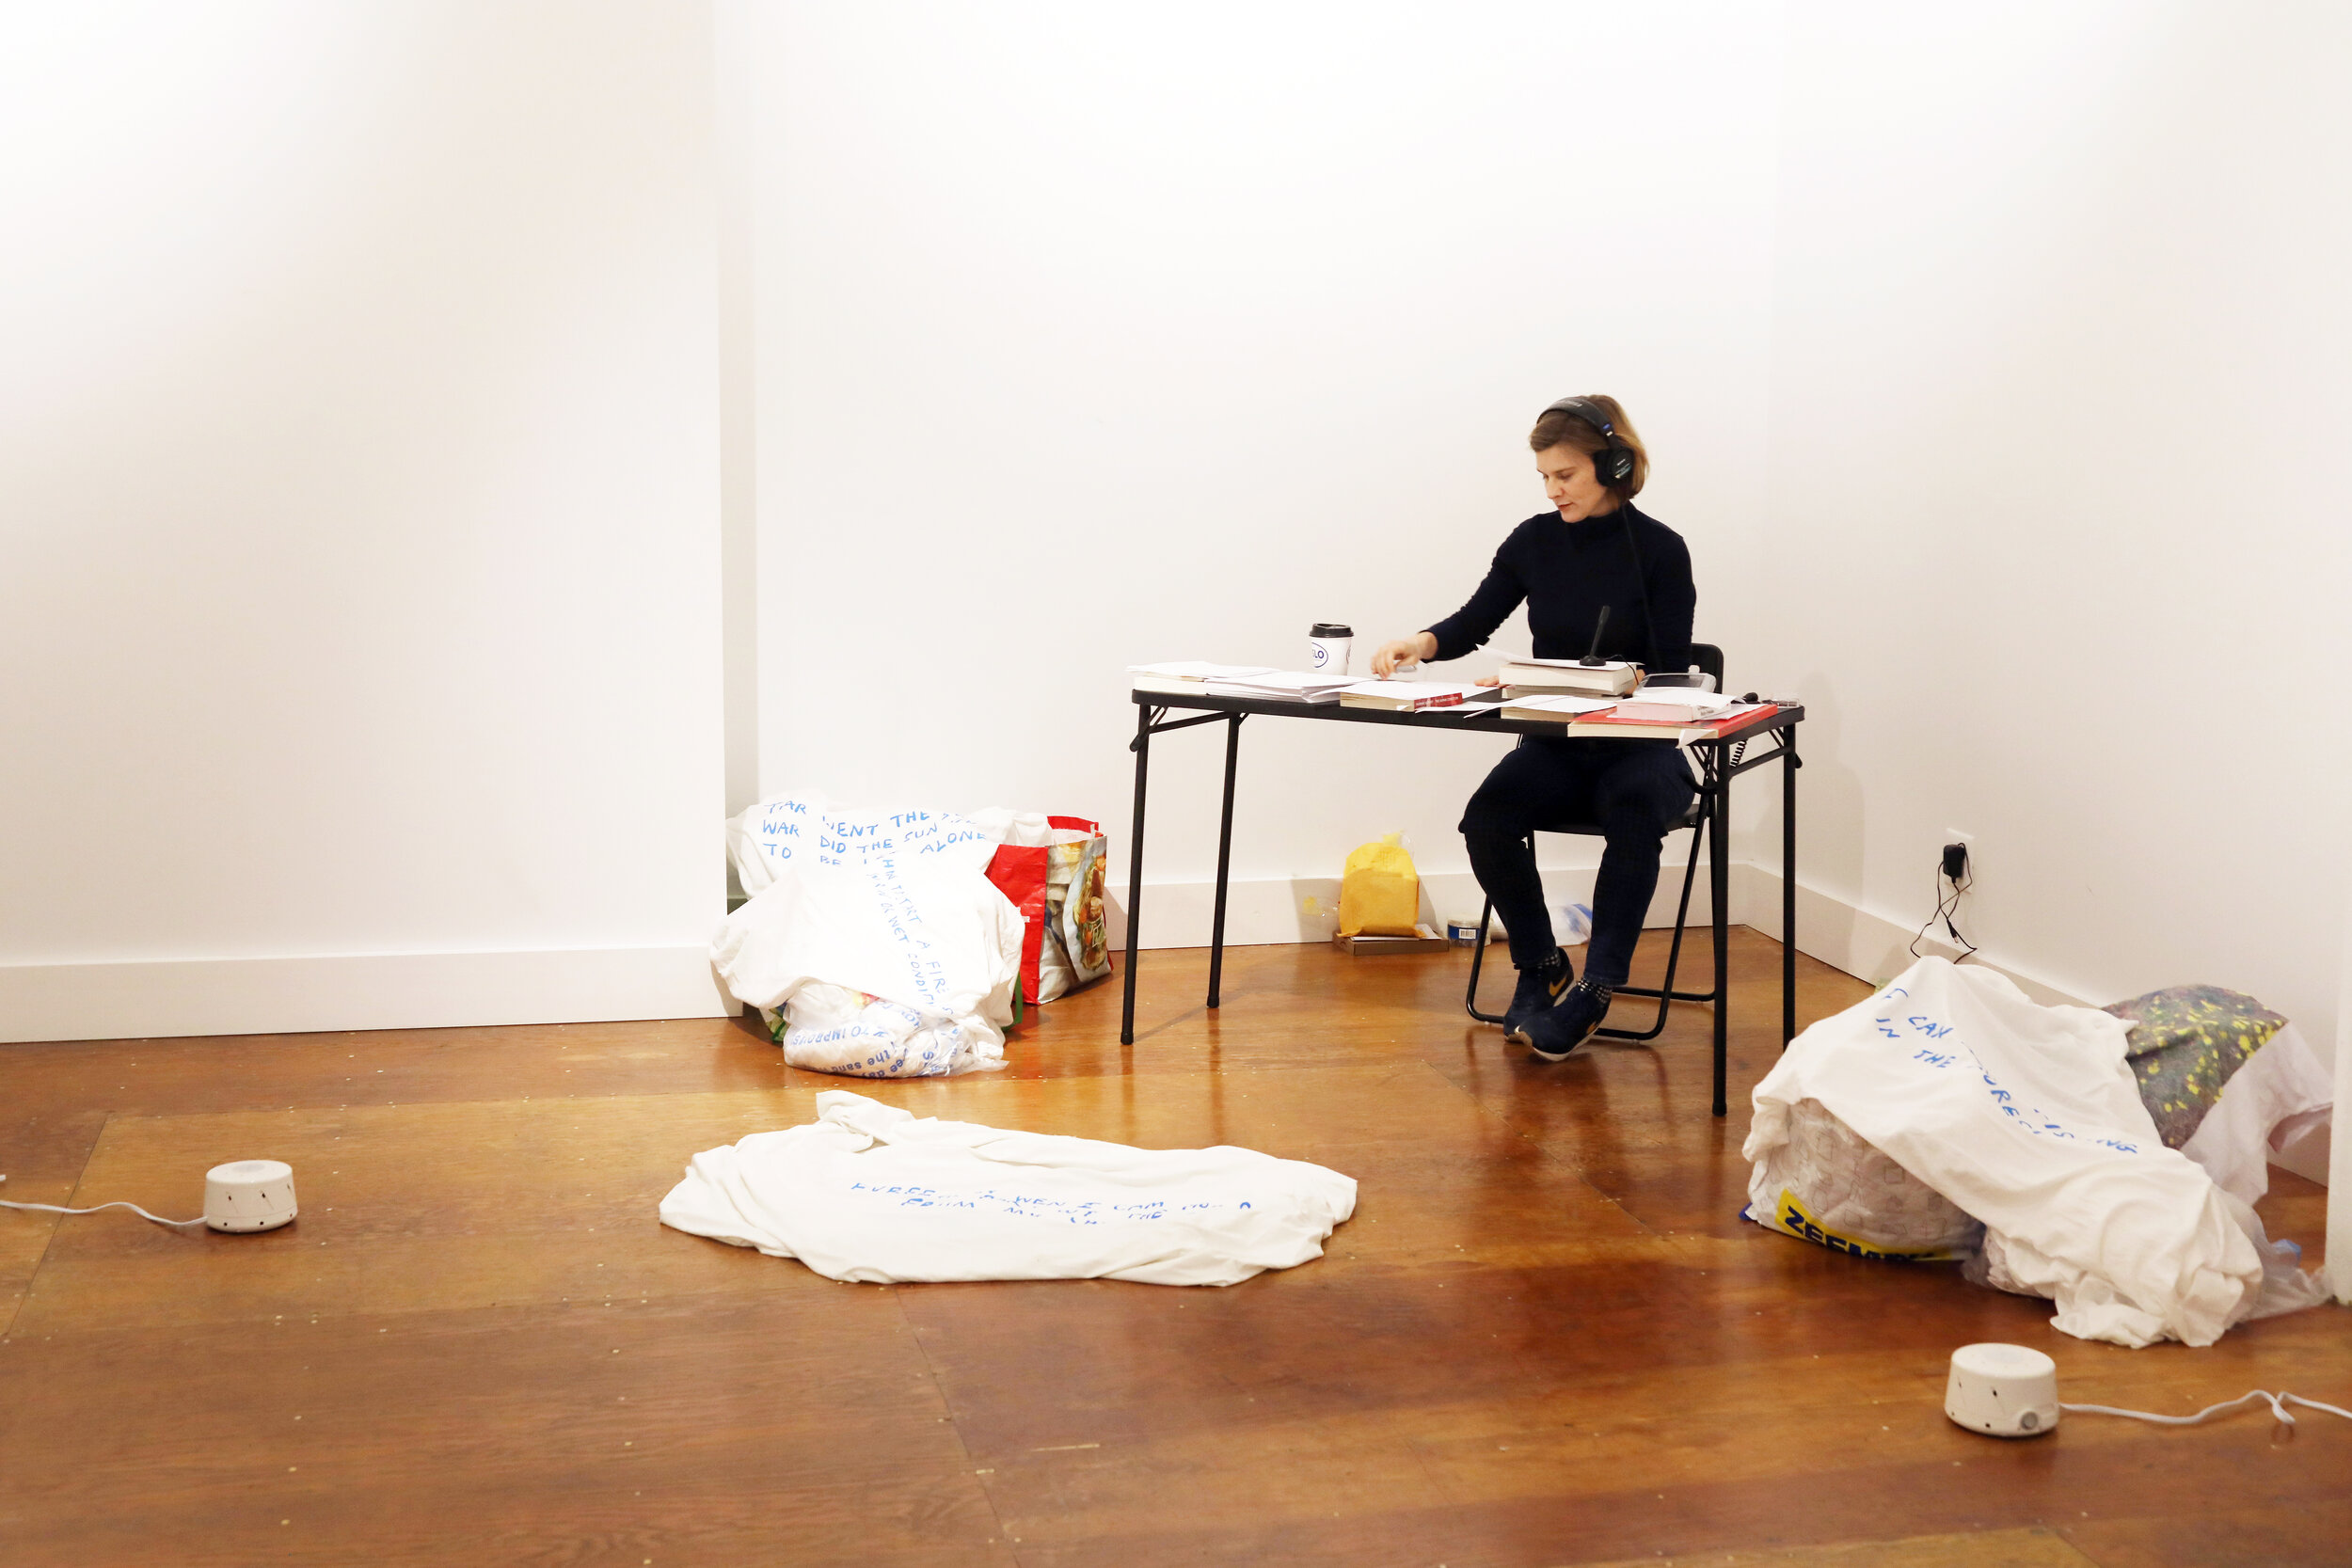 Jennifer Schmidt at a table in the far corner of a bright room with white walls and a hardwood floor